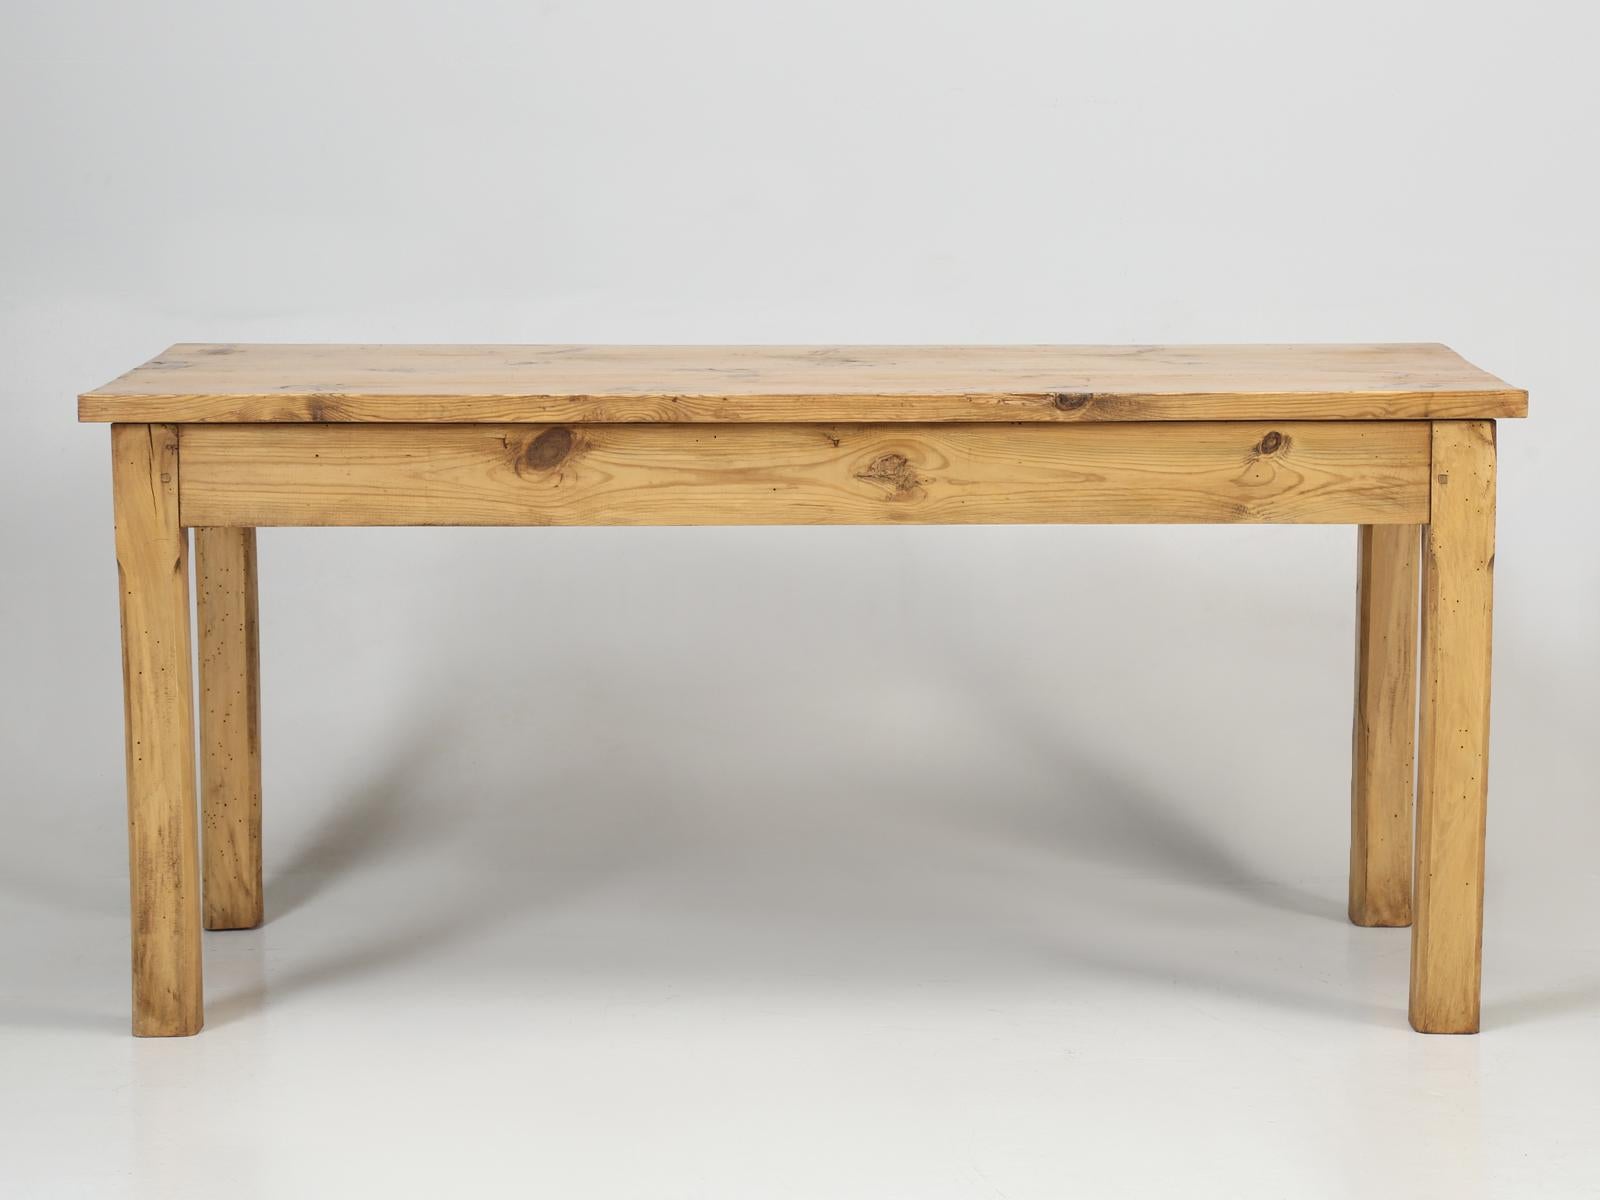 Early 20th Century Old Pine Farm Table from France, Restored with a Traditional Beeswax Finish